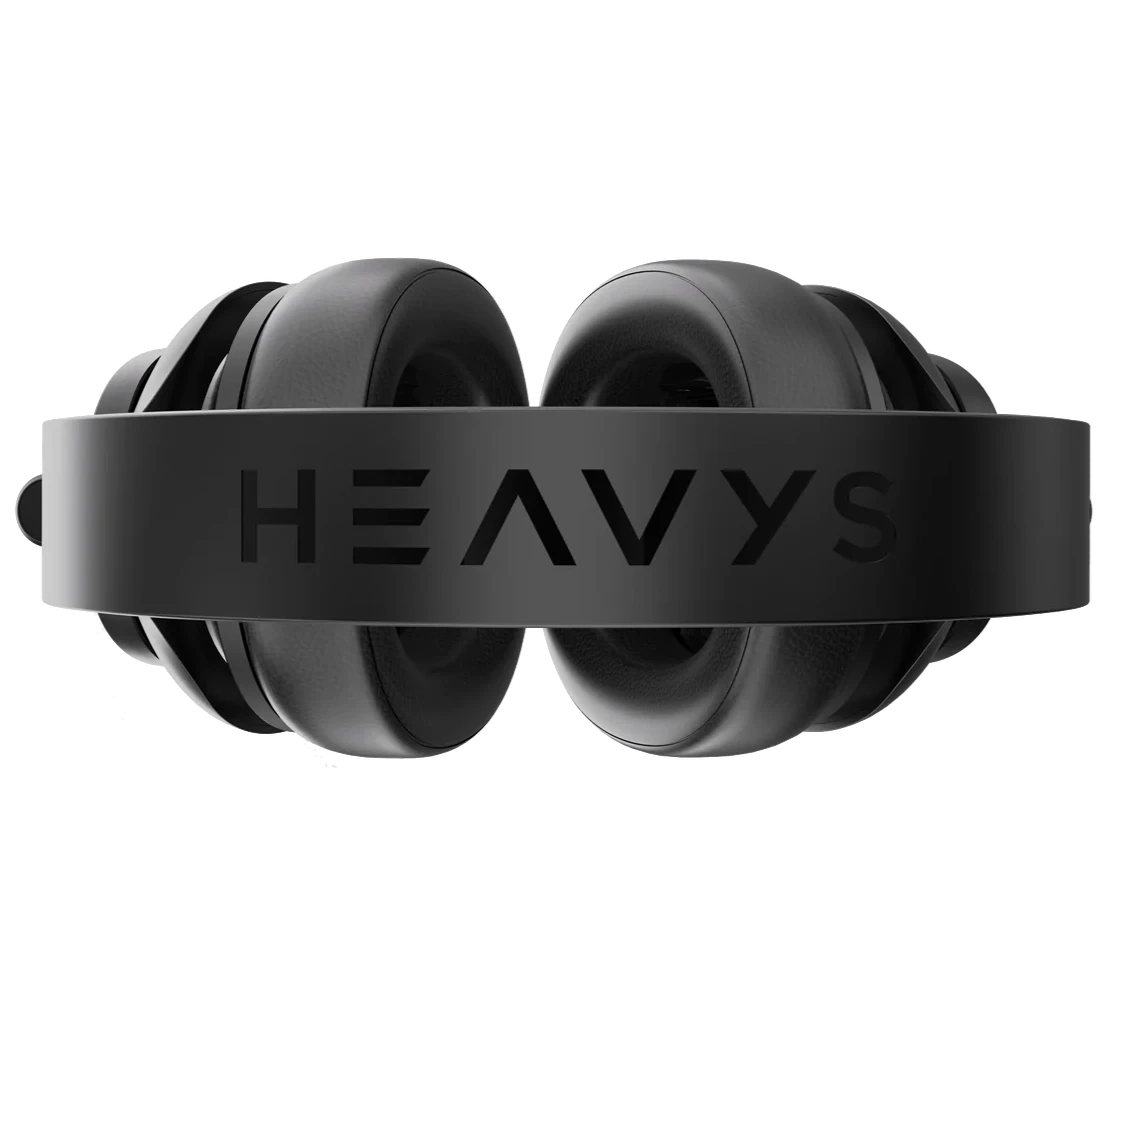 Archspire X Heavys Headphones *PRE-ORDER* SHIPS AFTER MAY 6